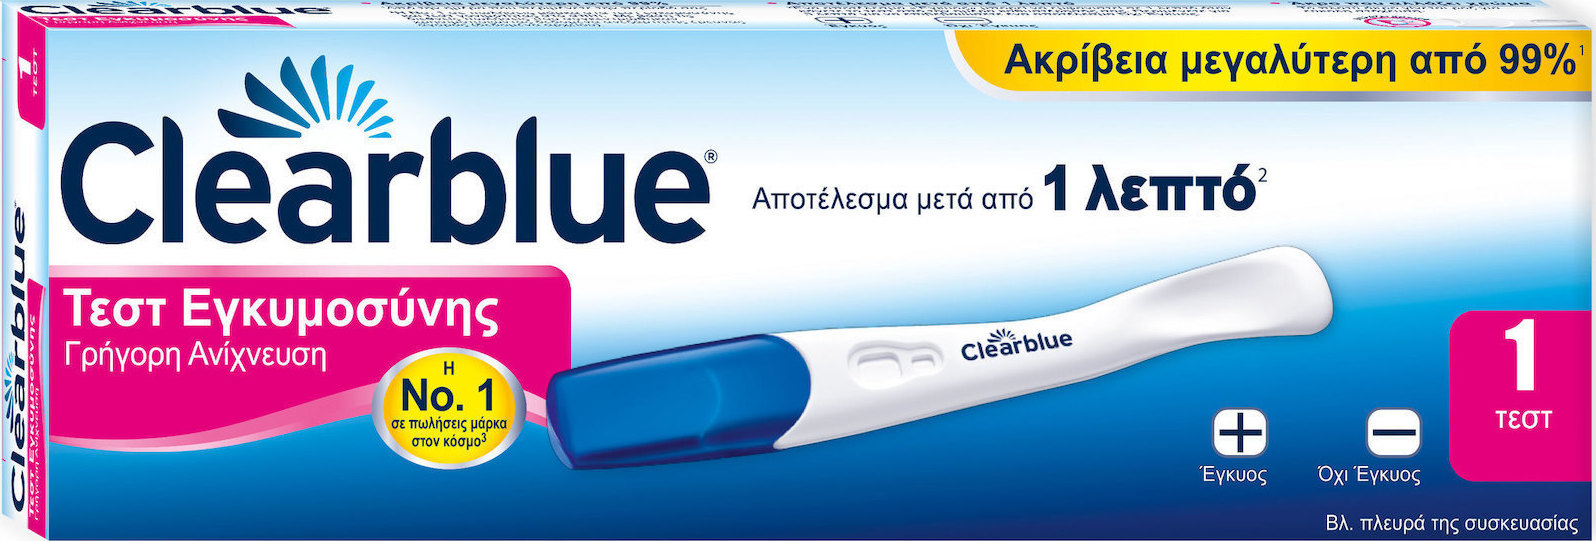 Clearblue pregnancy test for rapid detection 1pcs P&G